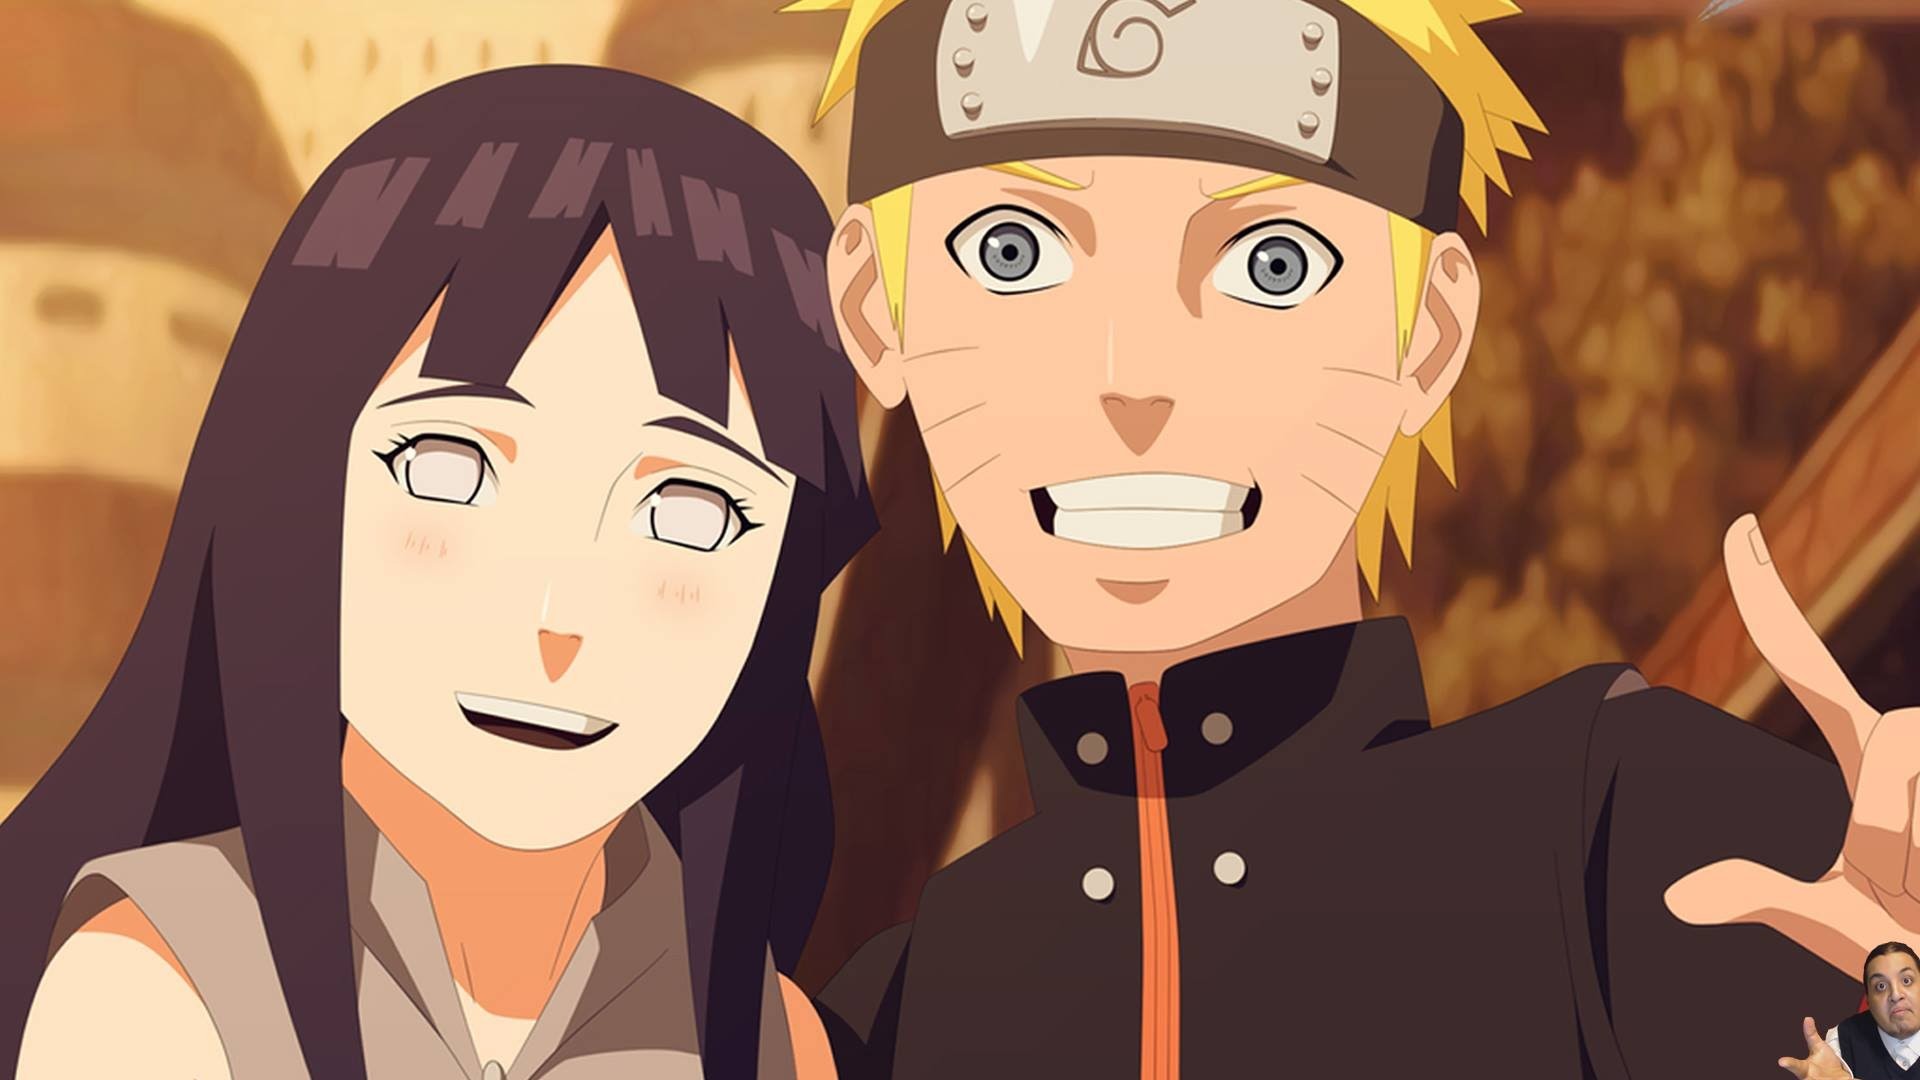 1920x1080 Huge New Naruto Project Coming After Manga Ends + The Last Naruto The Movie  Synopsis -ãã«ã- ã¶Â·ã©ã¹ã - YouTube